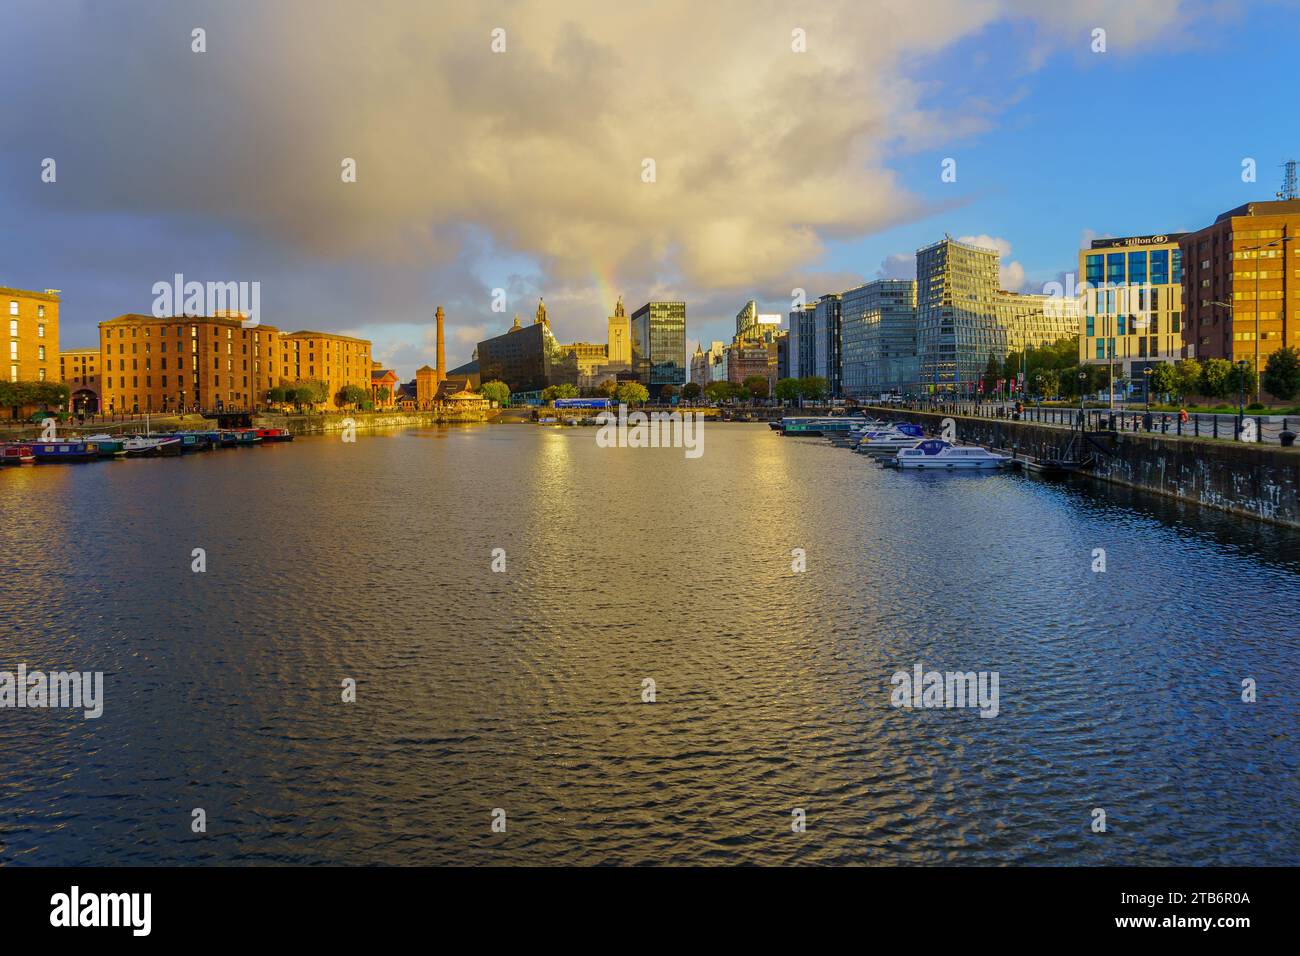 Liverpool, UK - October 08, 2022: Sunrise view of the Royal Albert Dock, with various buildings, in Liverpool, Merseyside, England, UK Stock Photo